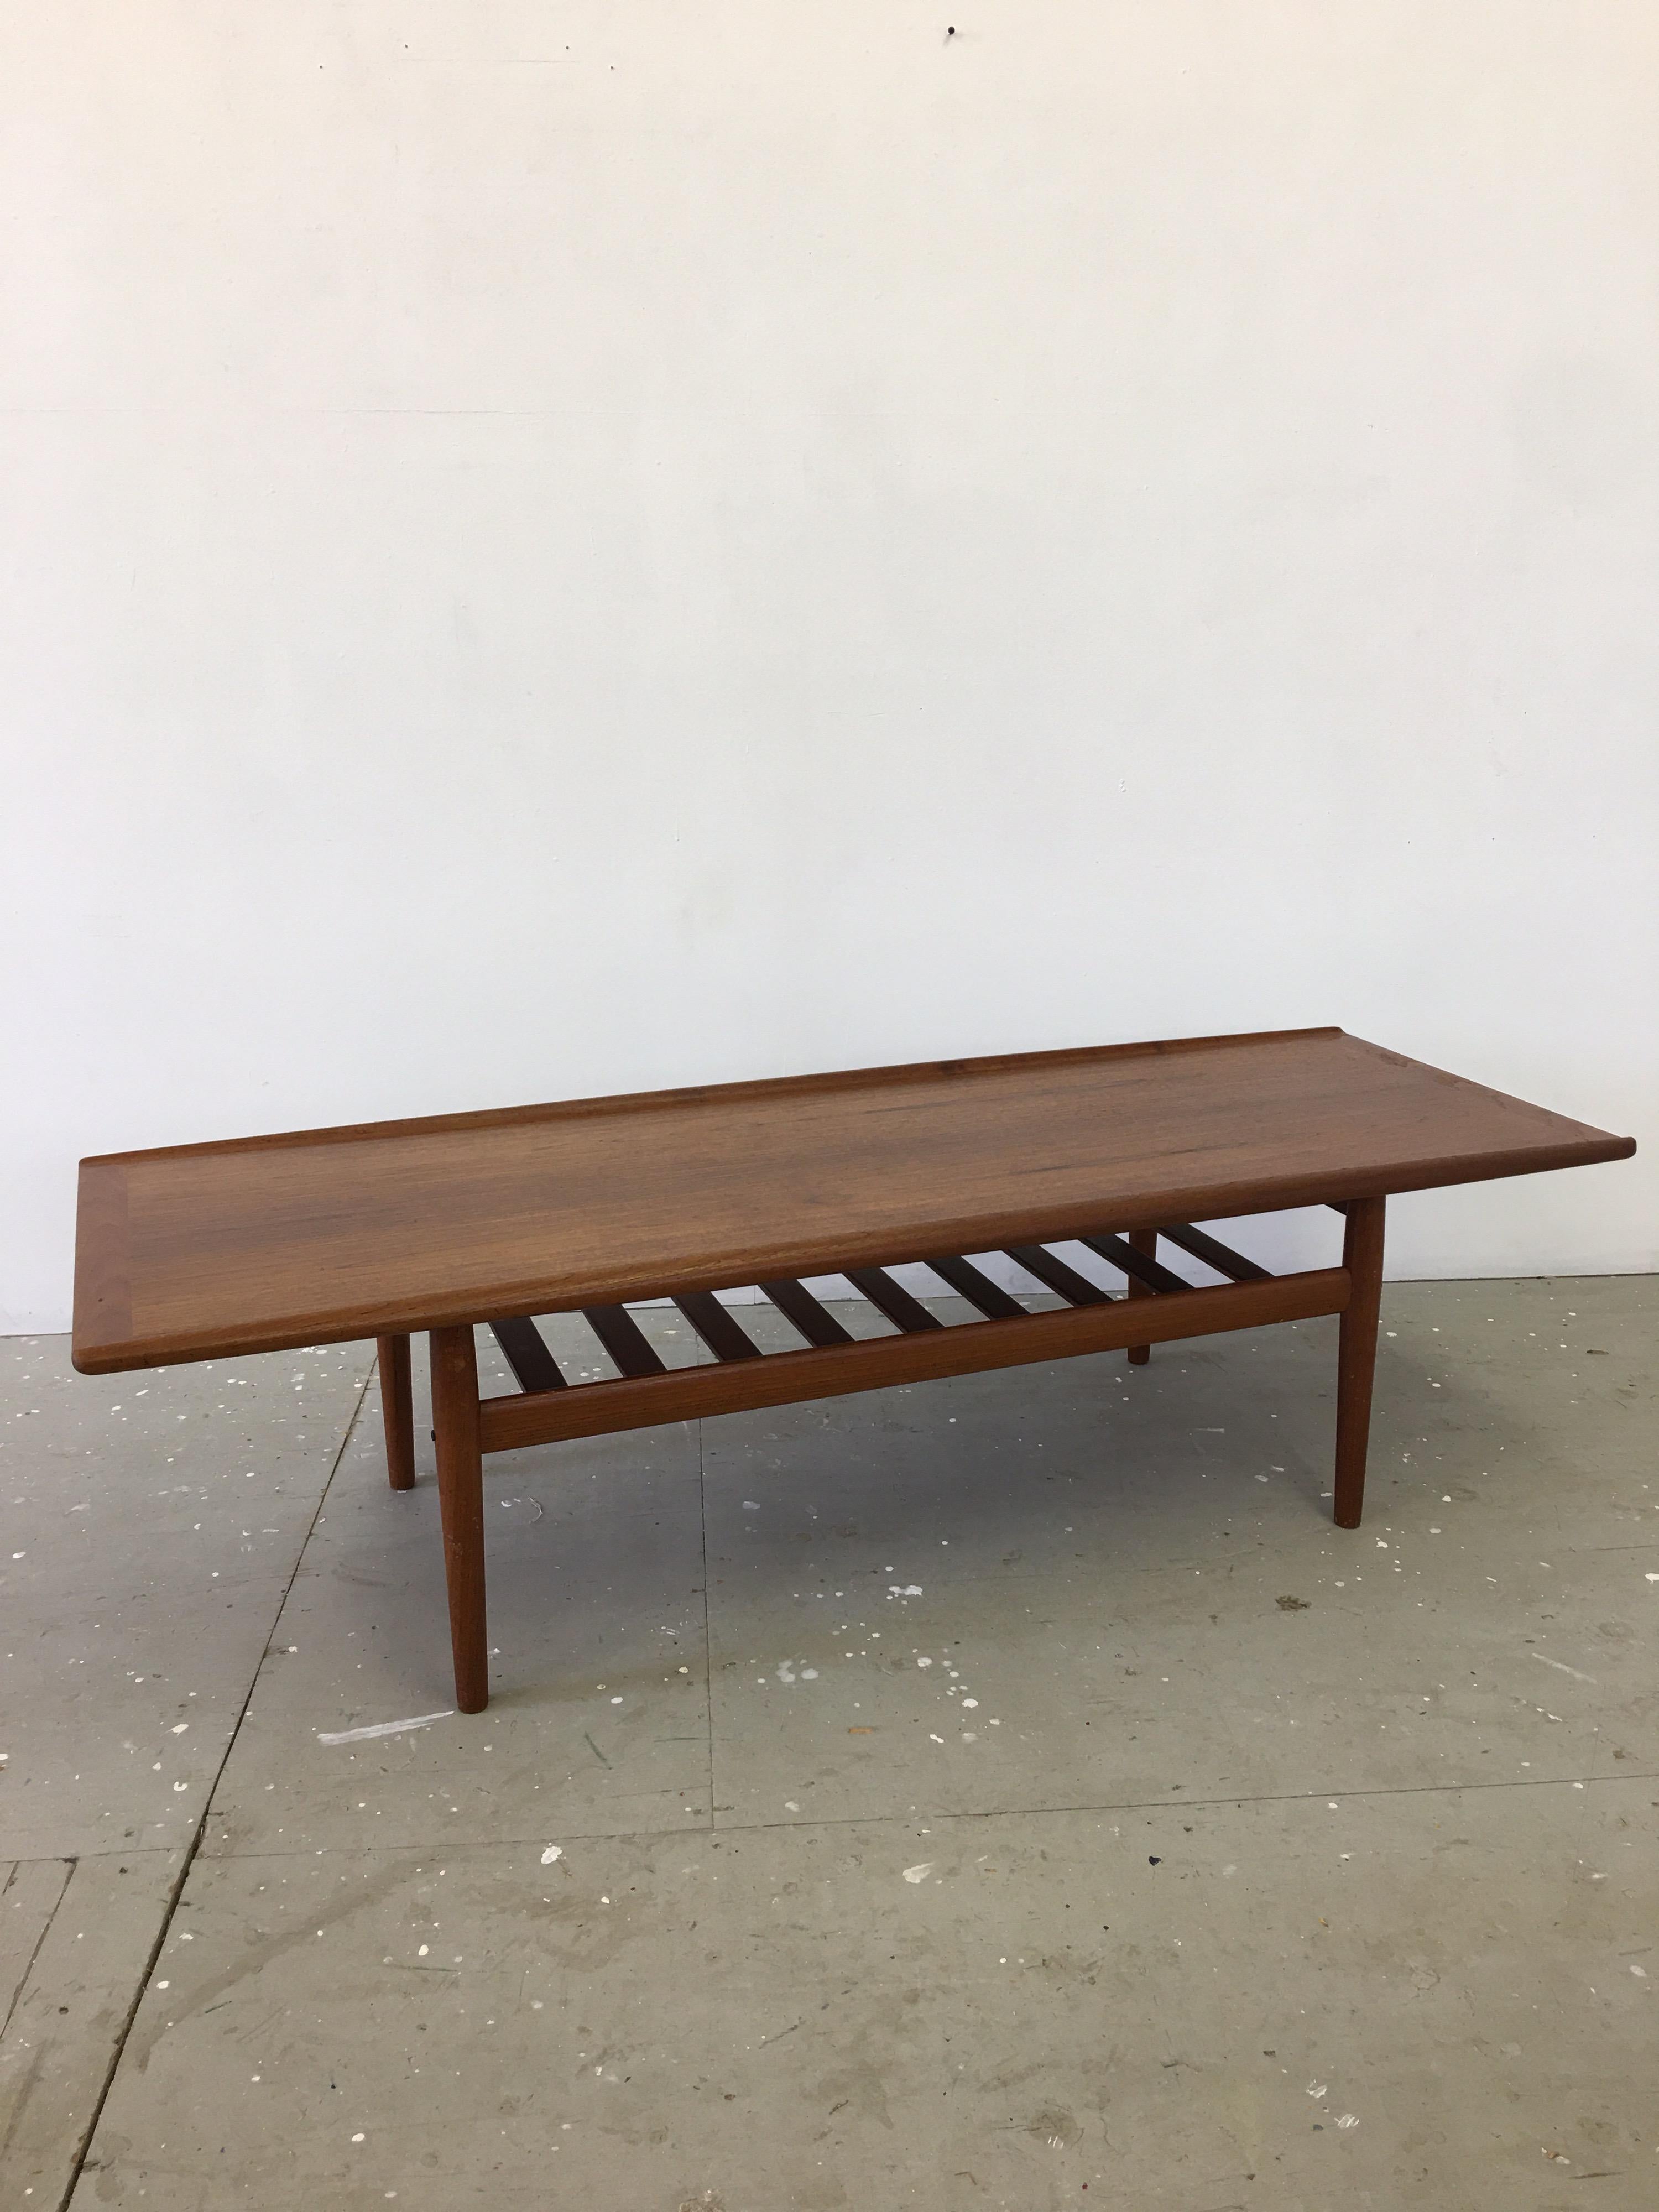 Grete Jalk Teak Coffee Table with stretcher lower shelf, perfect storage for magazines and books!  Table has a Thick Round Edge design to the two long sides.   Solid teak legs and stretchers! Small brass details to inner legs.